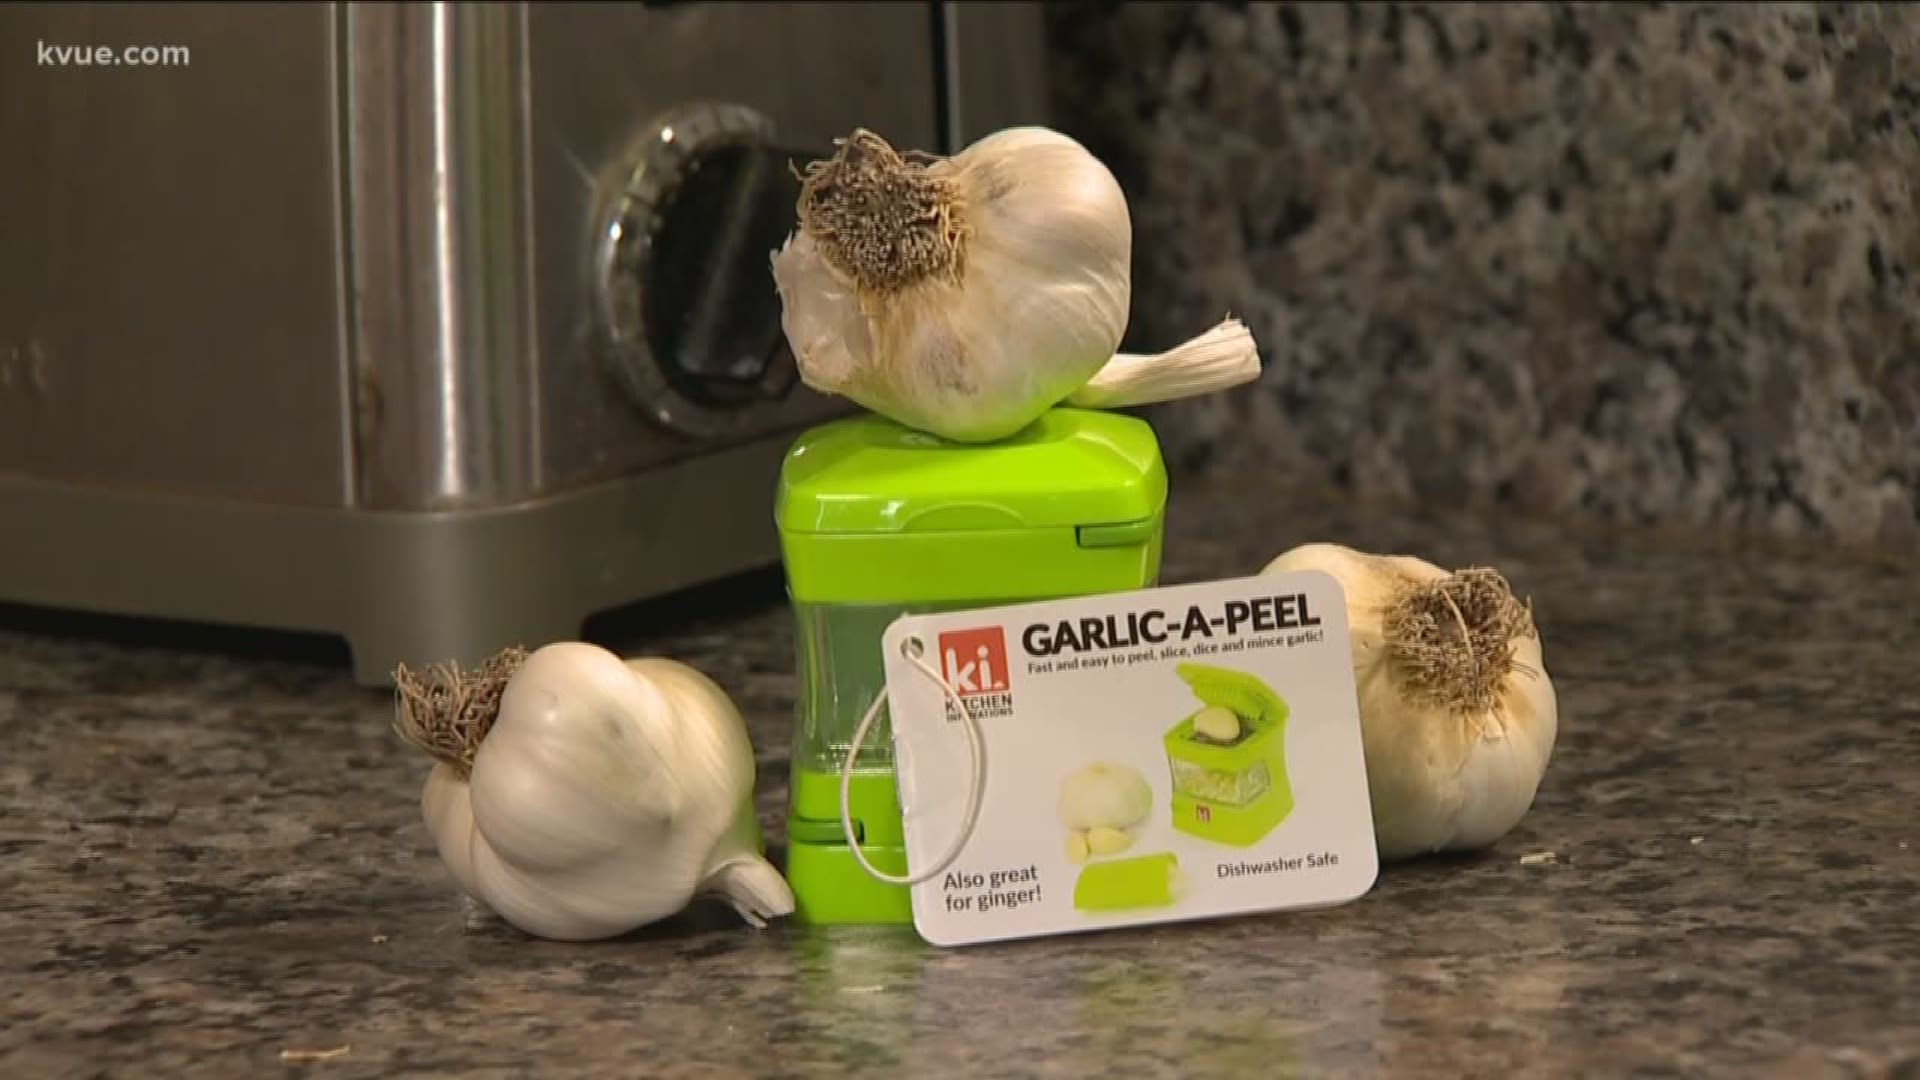 Garlic-A-Peel claims to make it easy to mince, peel and chop your garlic – and even store it for you.